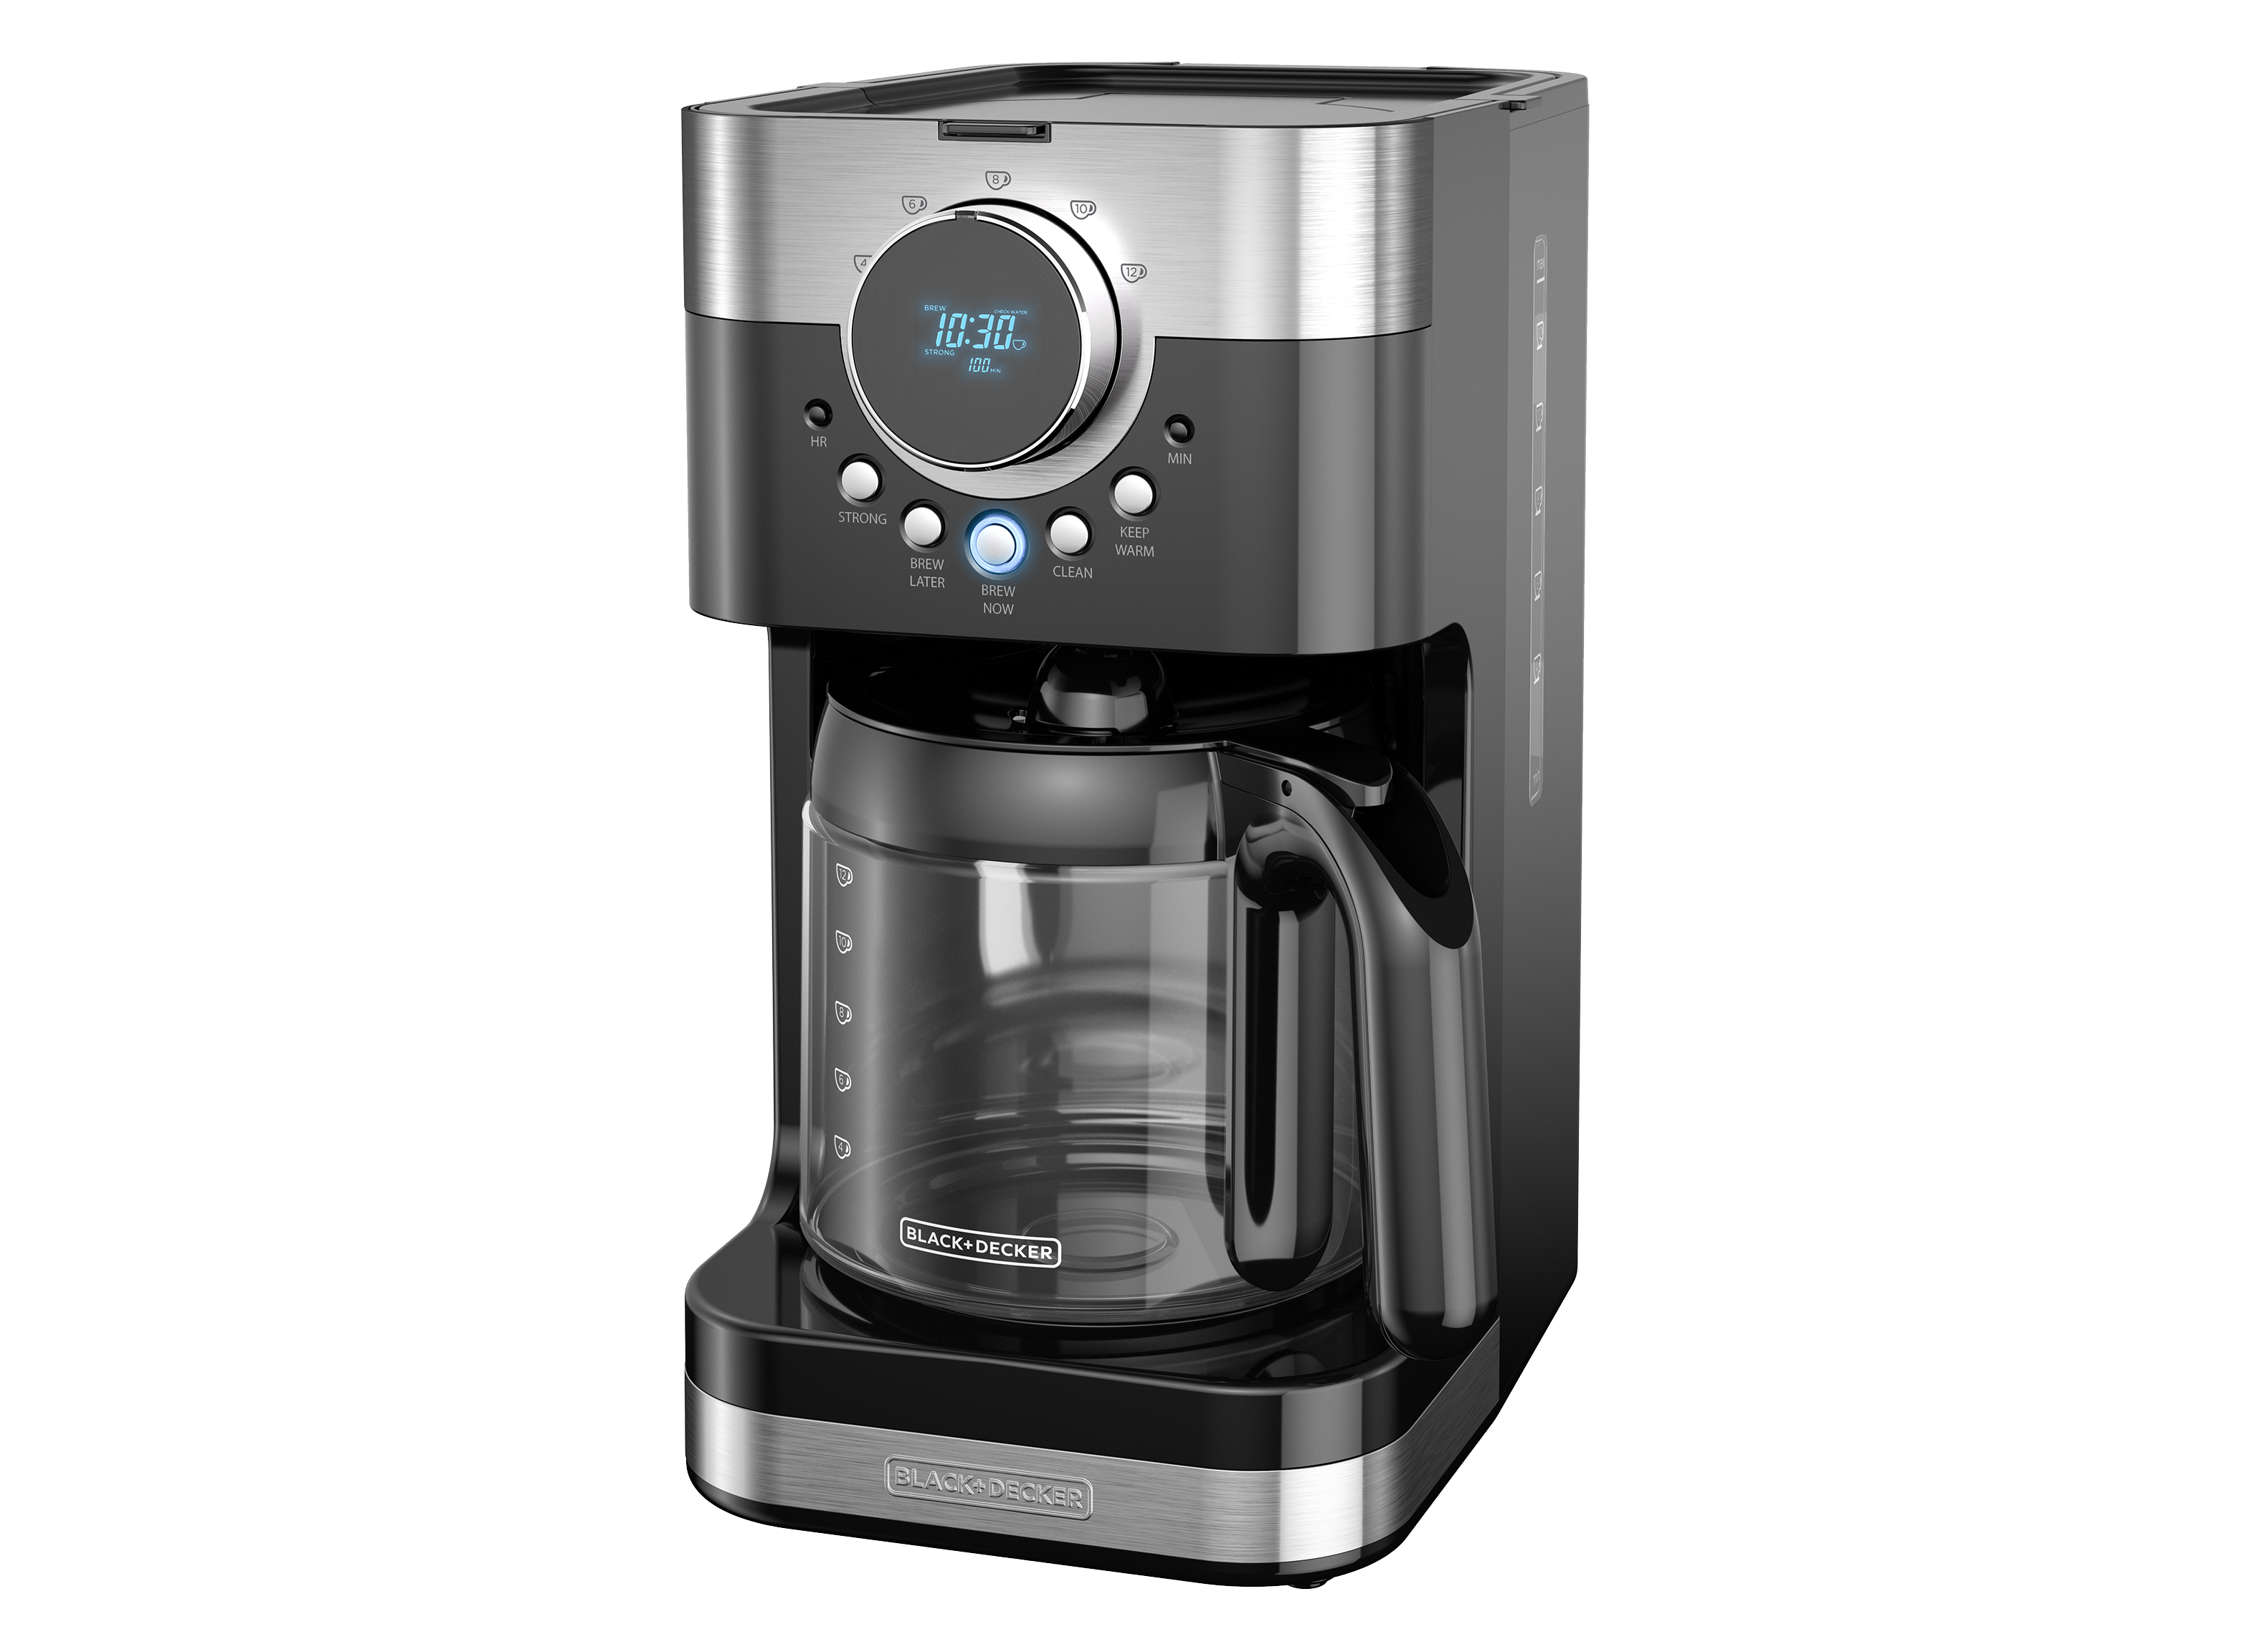 Black & decker coffee maker - household items - by owner